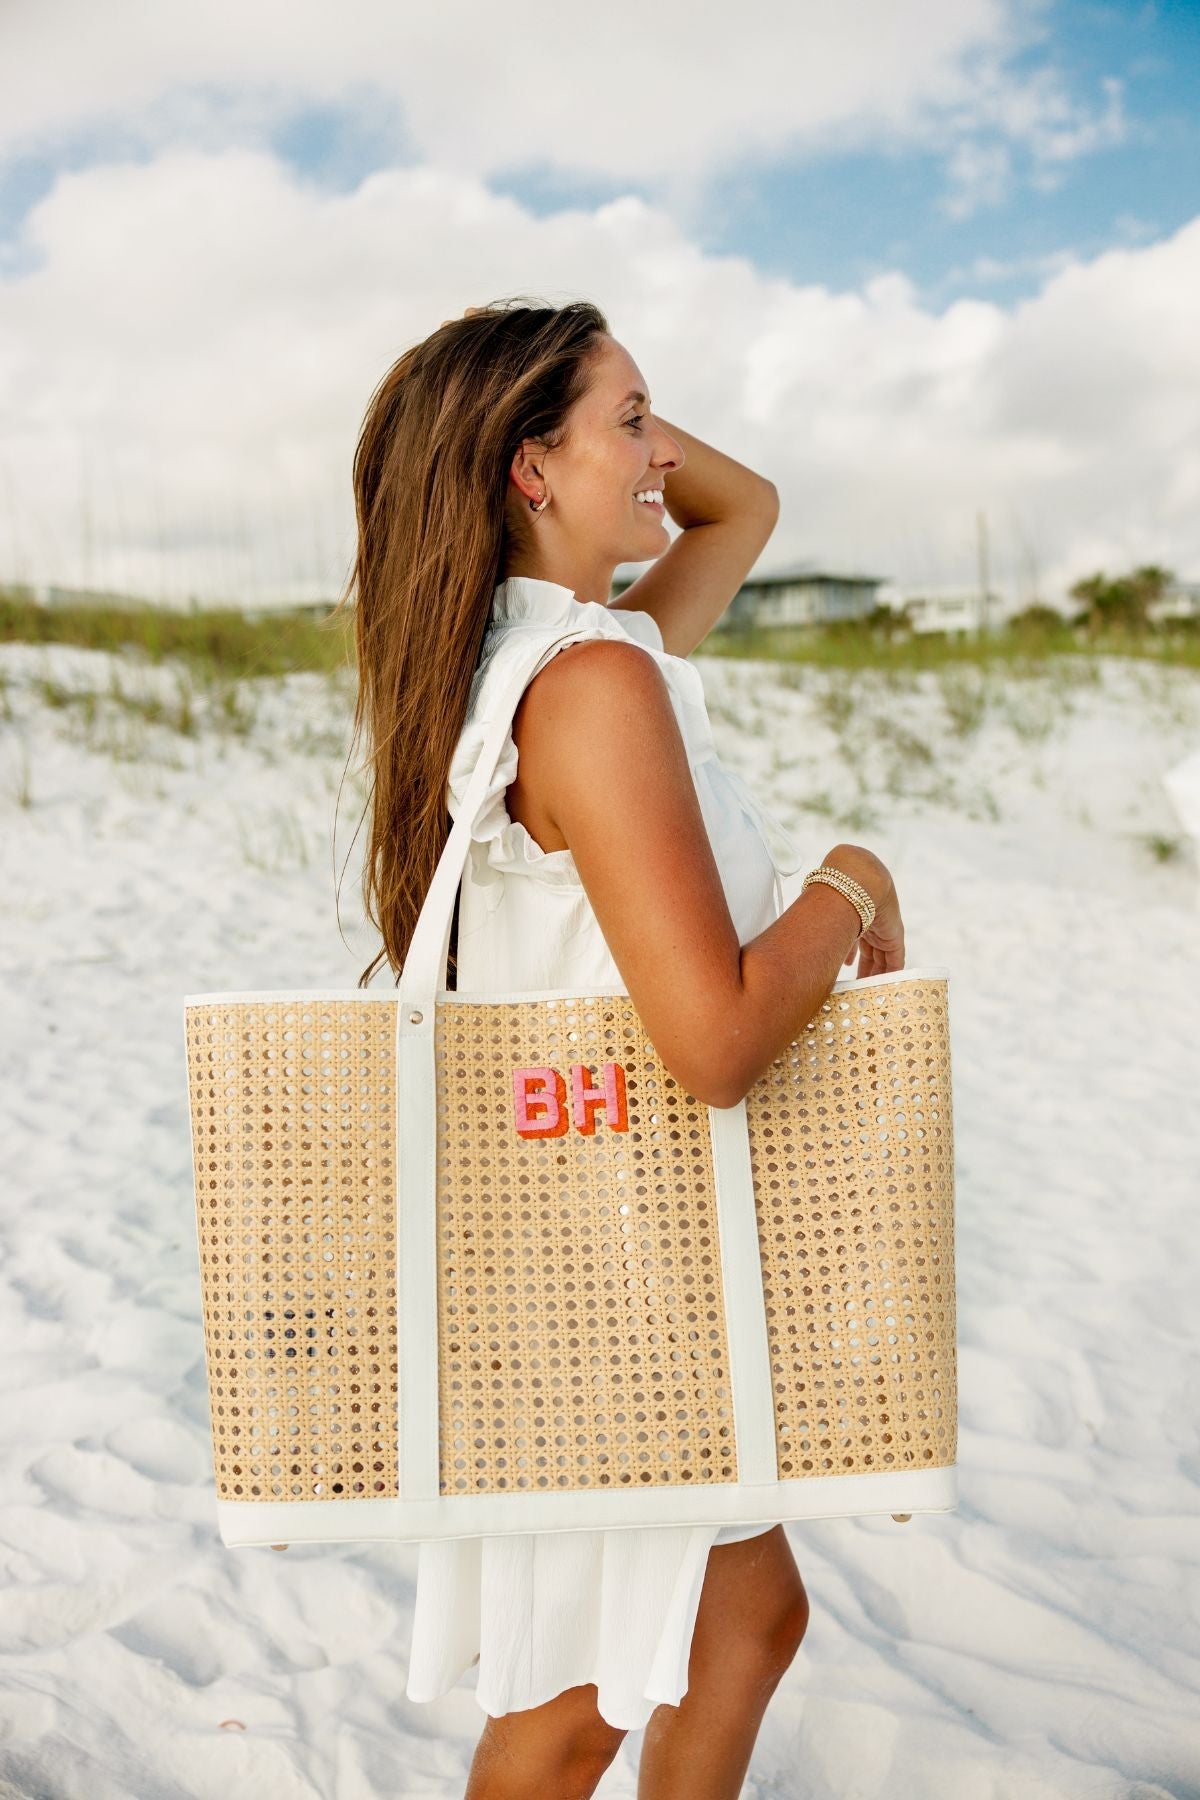 A canning tote is customized with a navy blue monogram